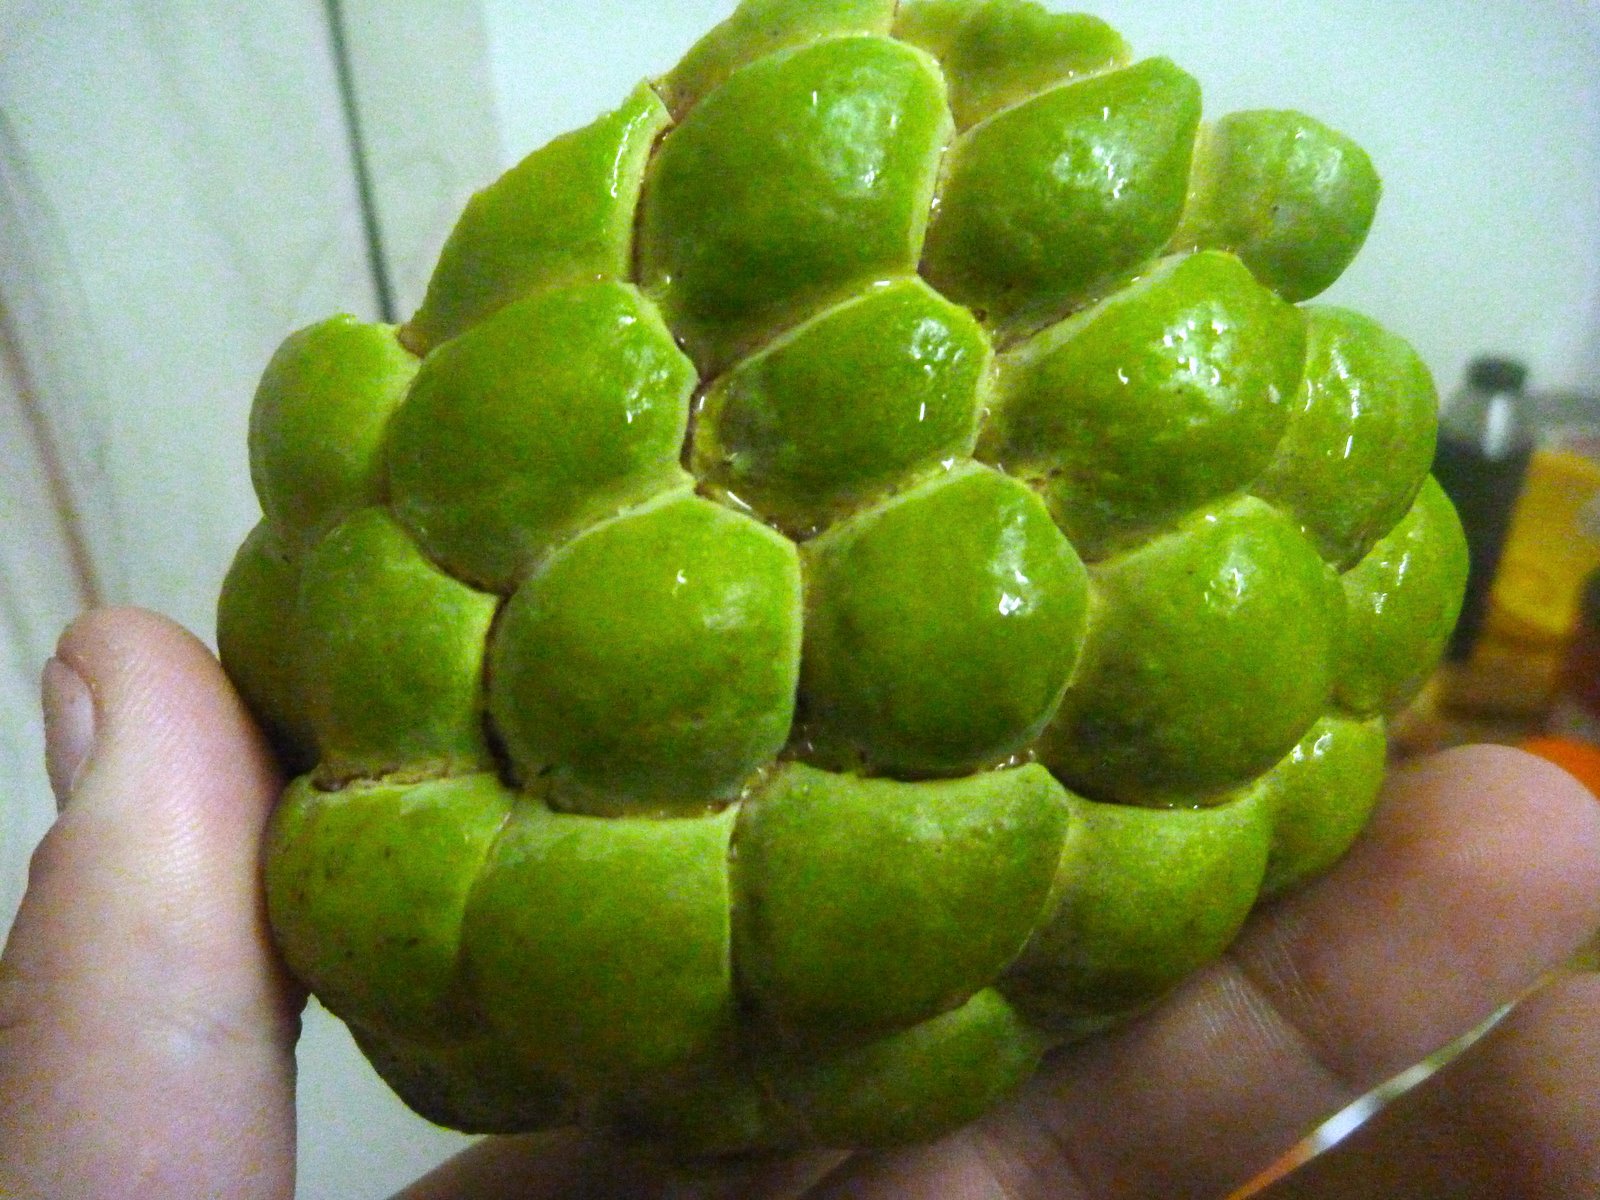 What I'm Eating - Sugar-apple | The Official Tim Stahl Blog